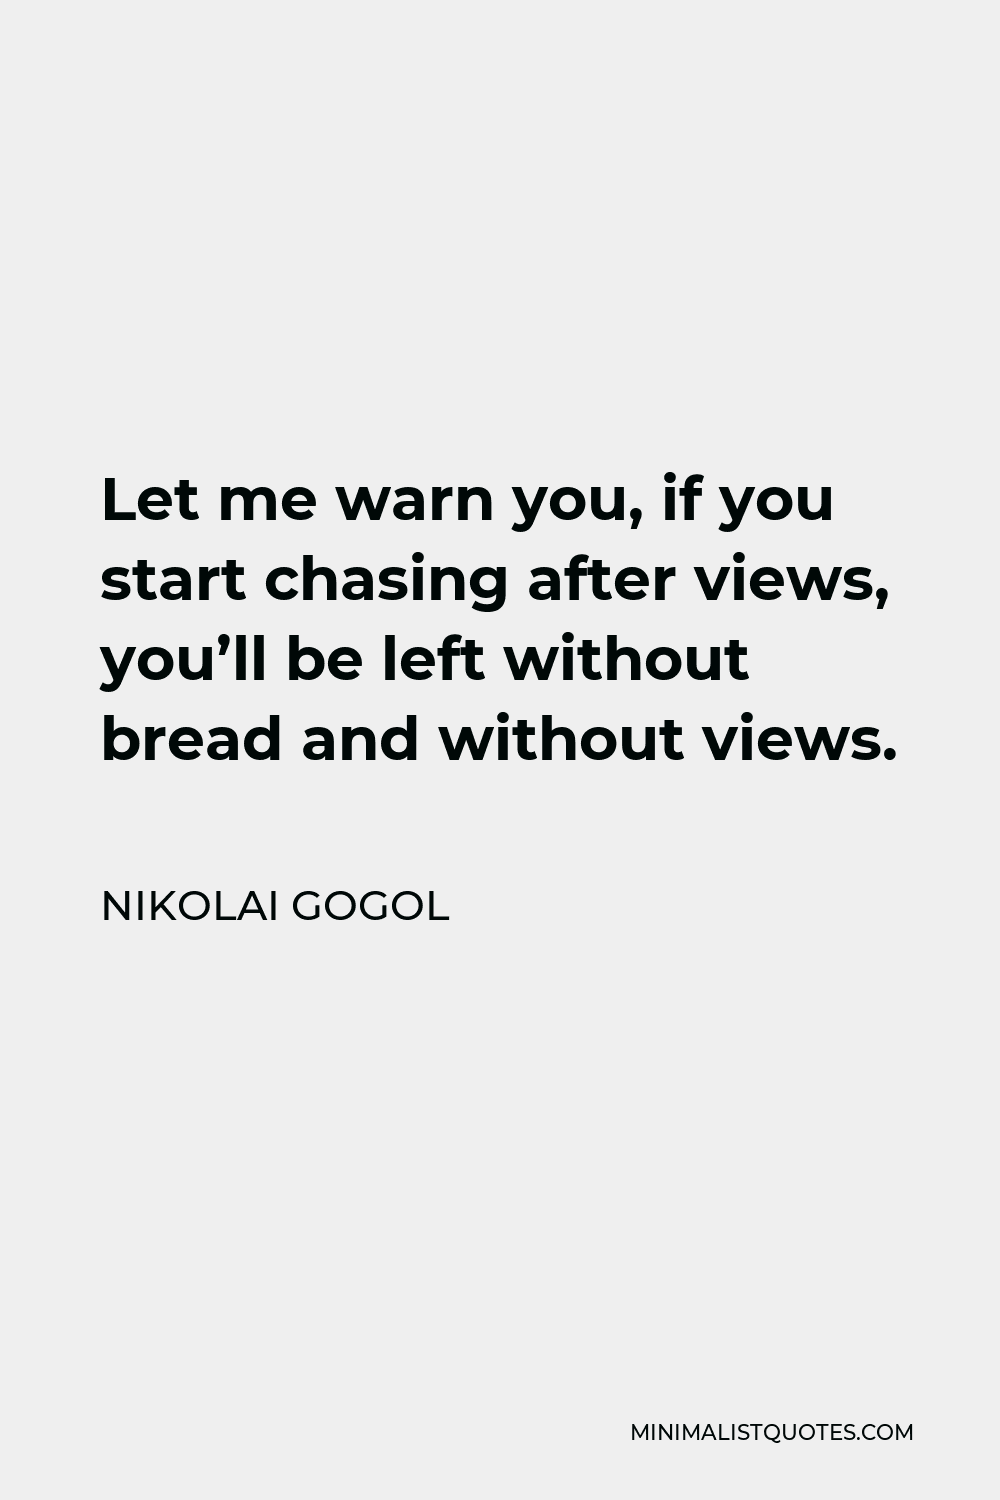 Nikolai Gogol Quote - Let me warn you, if you start chasing after views, you’ll be left without bread and without views.